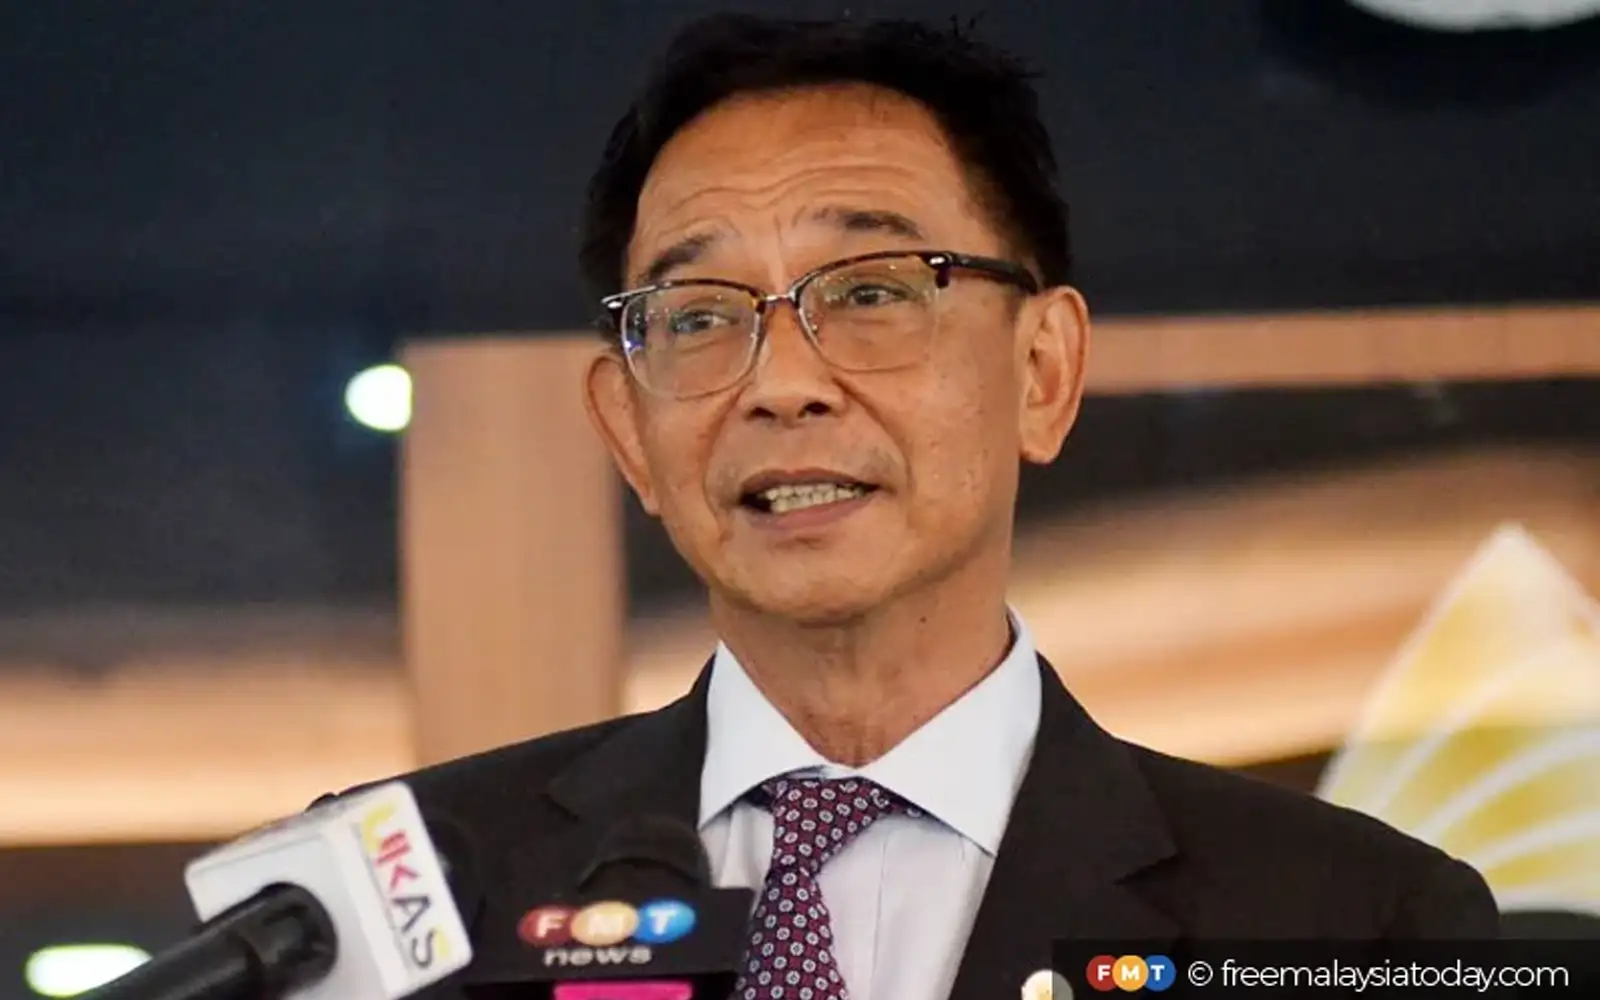 sarawak can benefit from hosting 2027 sea games, say economists